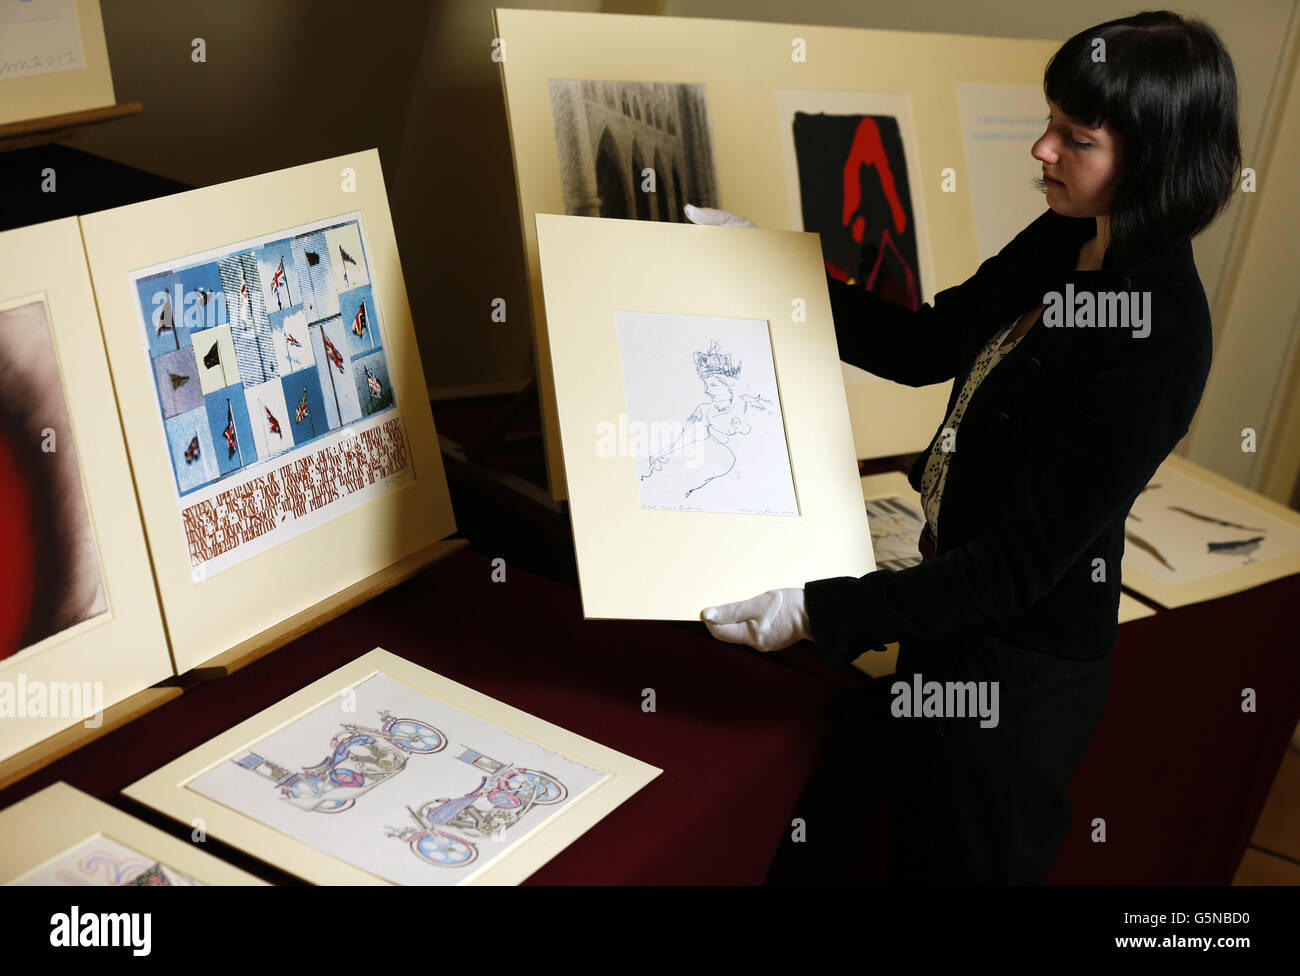 An employee of the Royal Academy of Arts displays 'HRH Royal Britannia 2012' by Tracey Emin, as part of the Diamond Jubilee gift to Queen Elizabeth II, of almost one hundred works of art from the Royal Academy of Arts at the Queen's Gallery, Buckingham Palace. Stock Photo